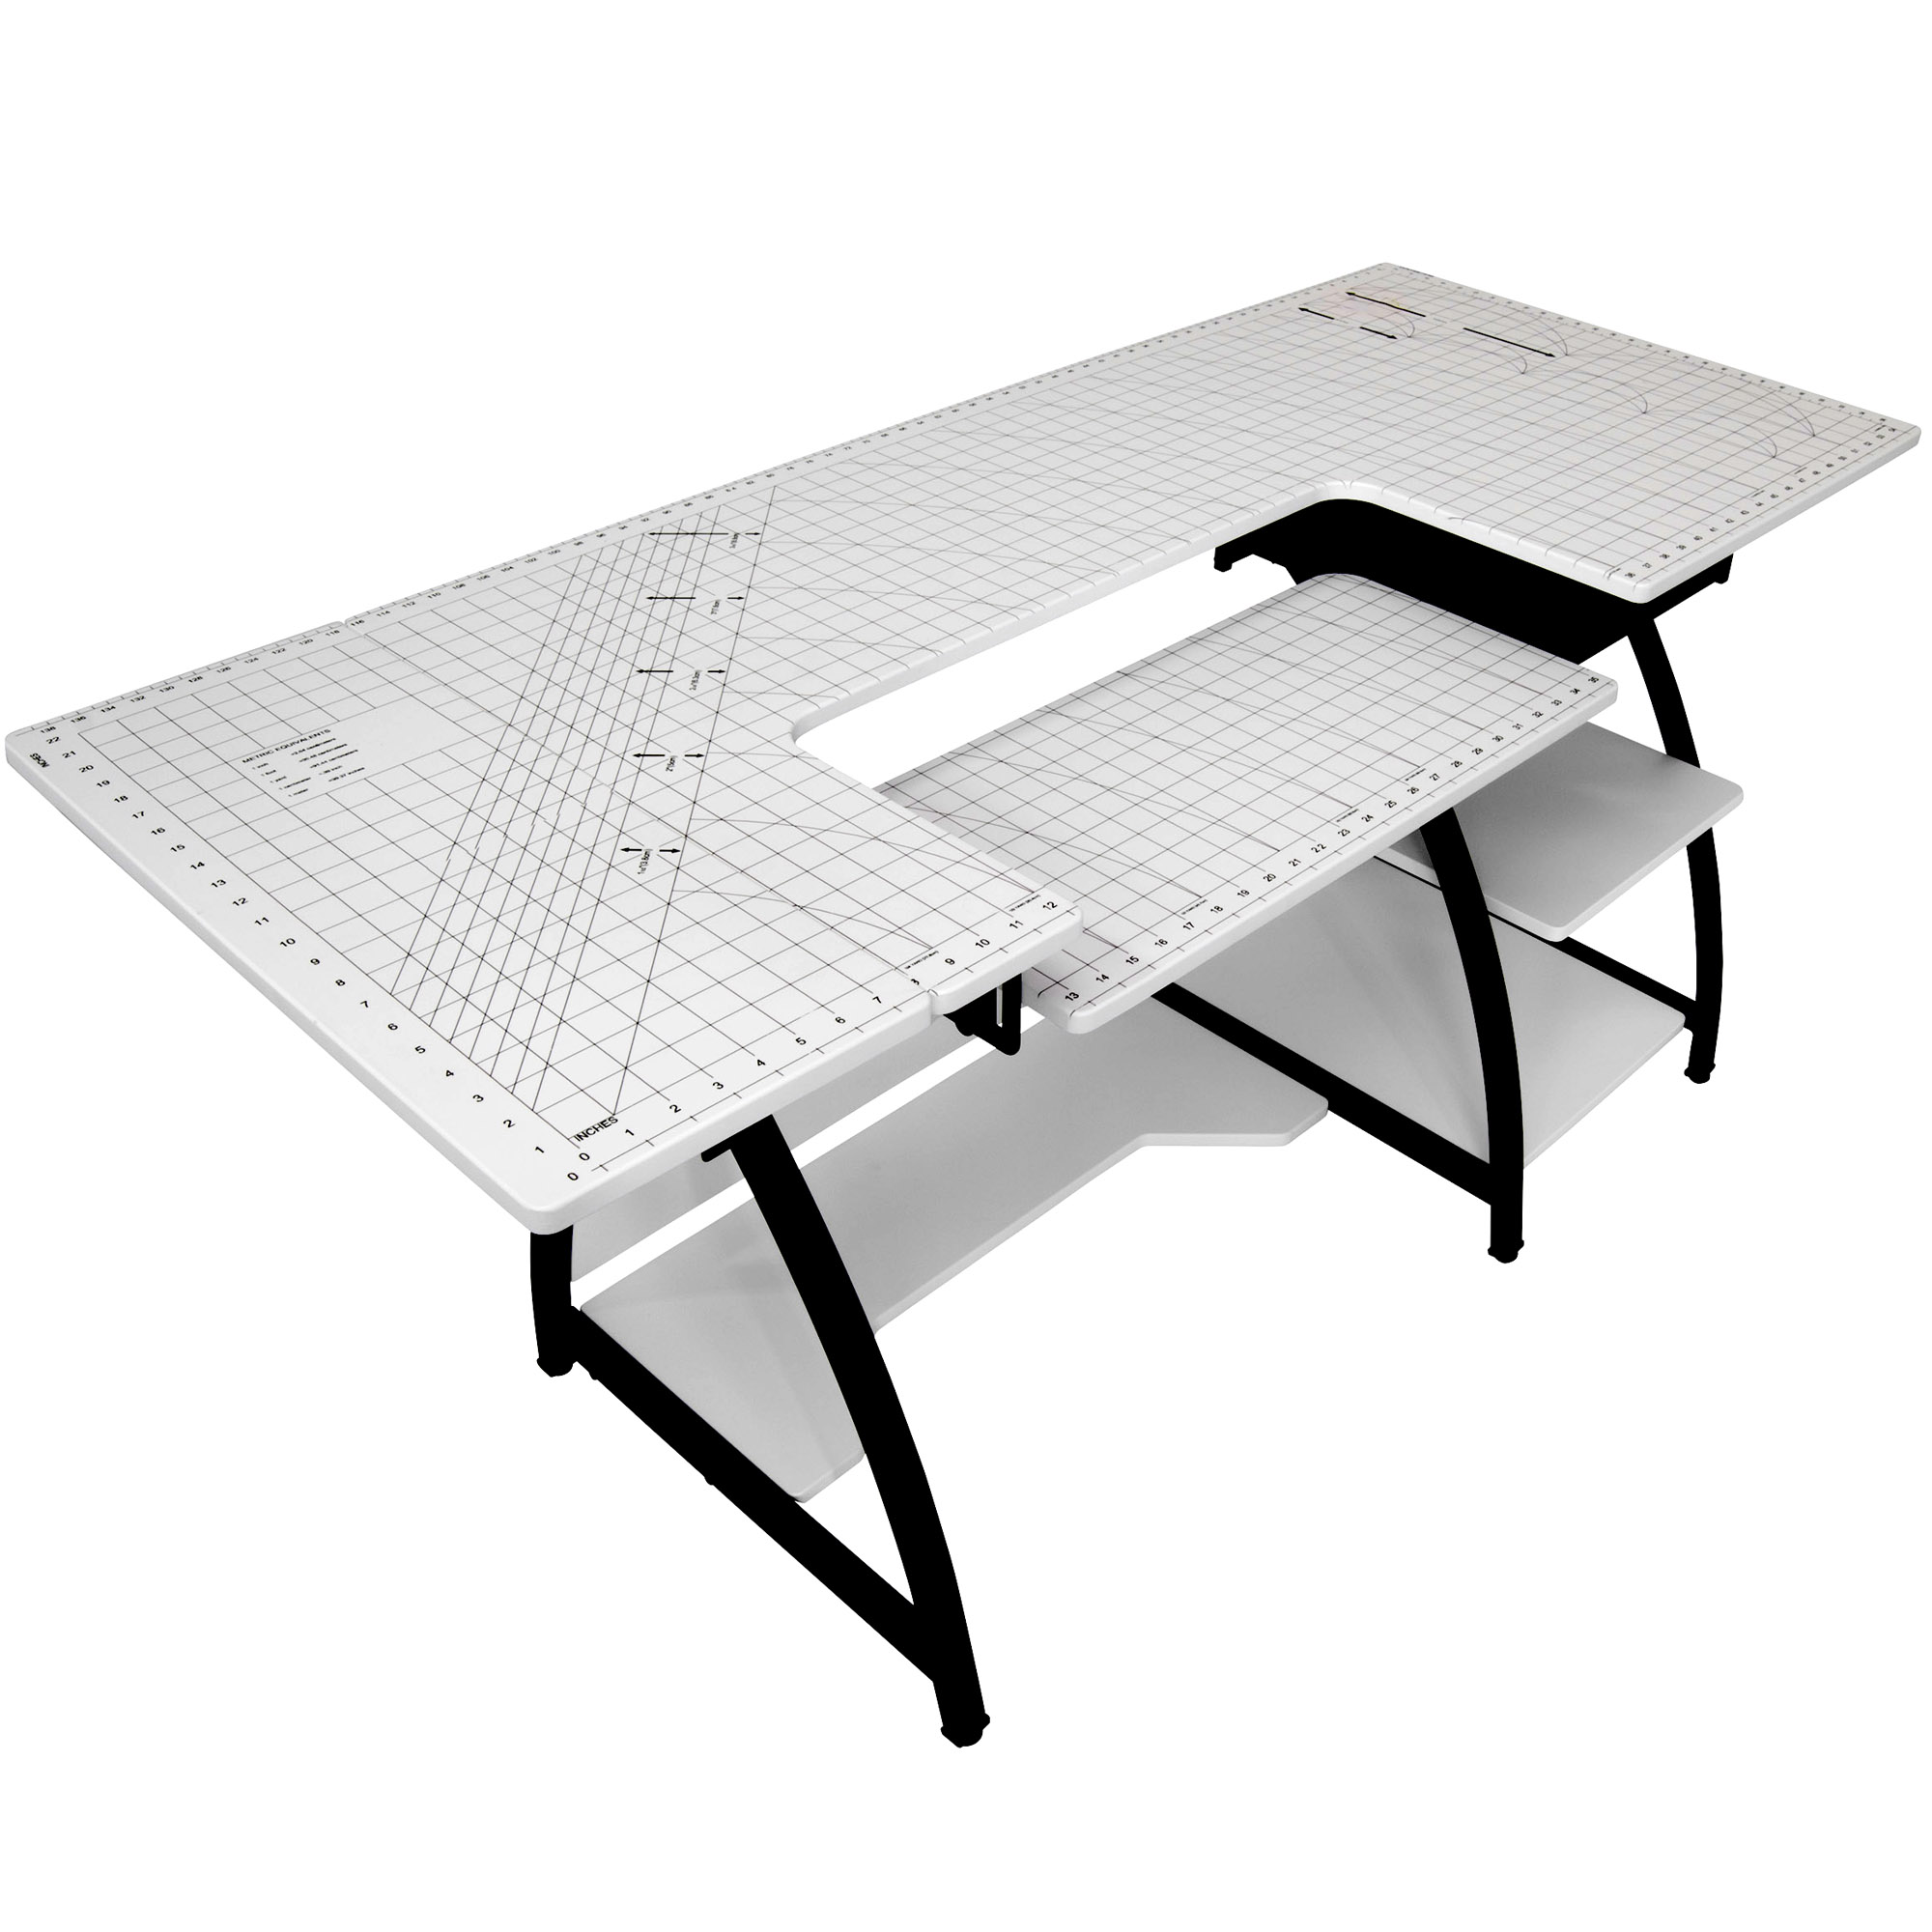 Image of: Sewing Online Large Sewing Table, with Gridded White Top and Black Legs